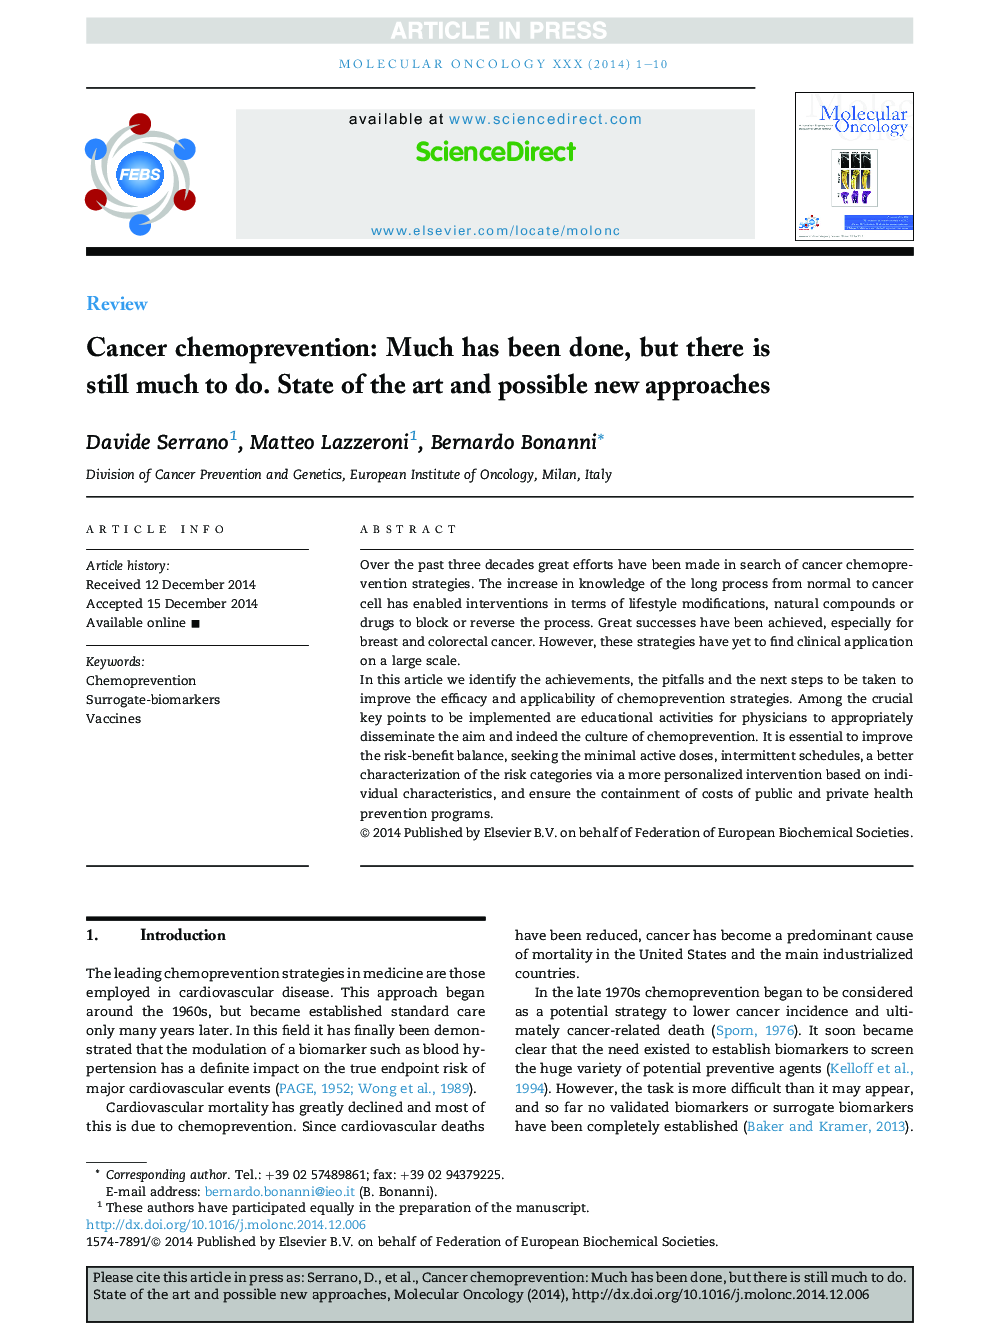 Cancer chemoprevention: Much has been done, but there is still much to do. State of the art and possible new approaches